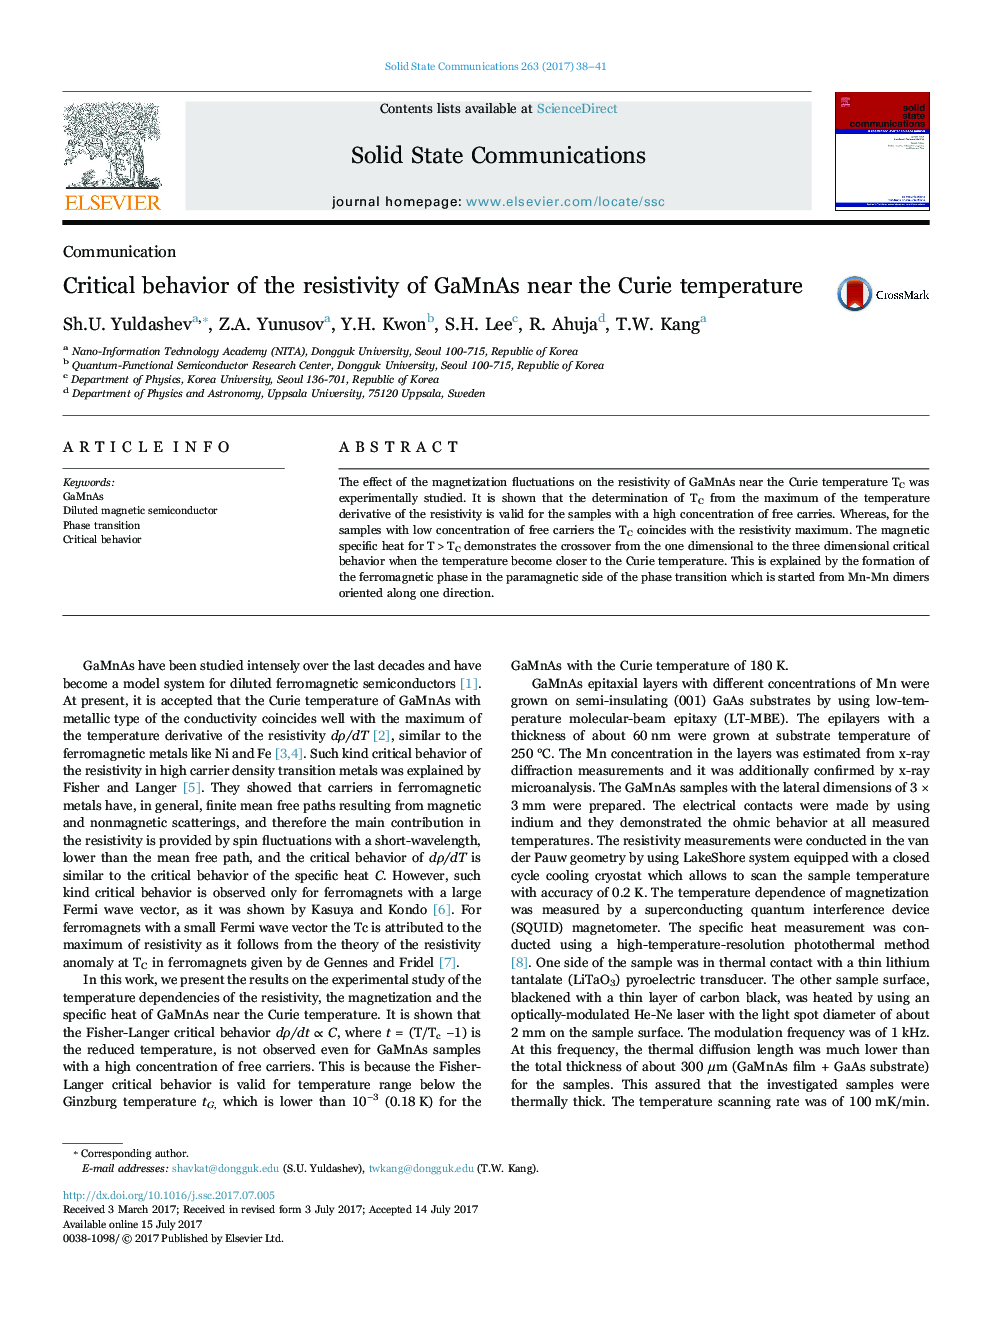 Critical behavior of the resistivity of GaMnAs near the Curie temperature